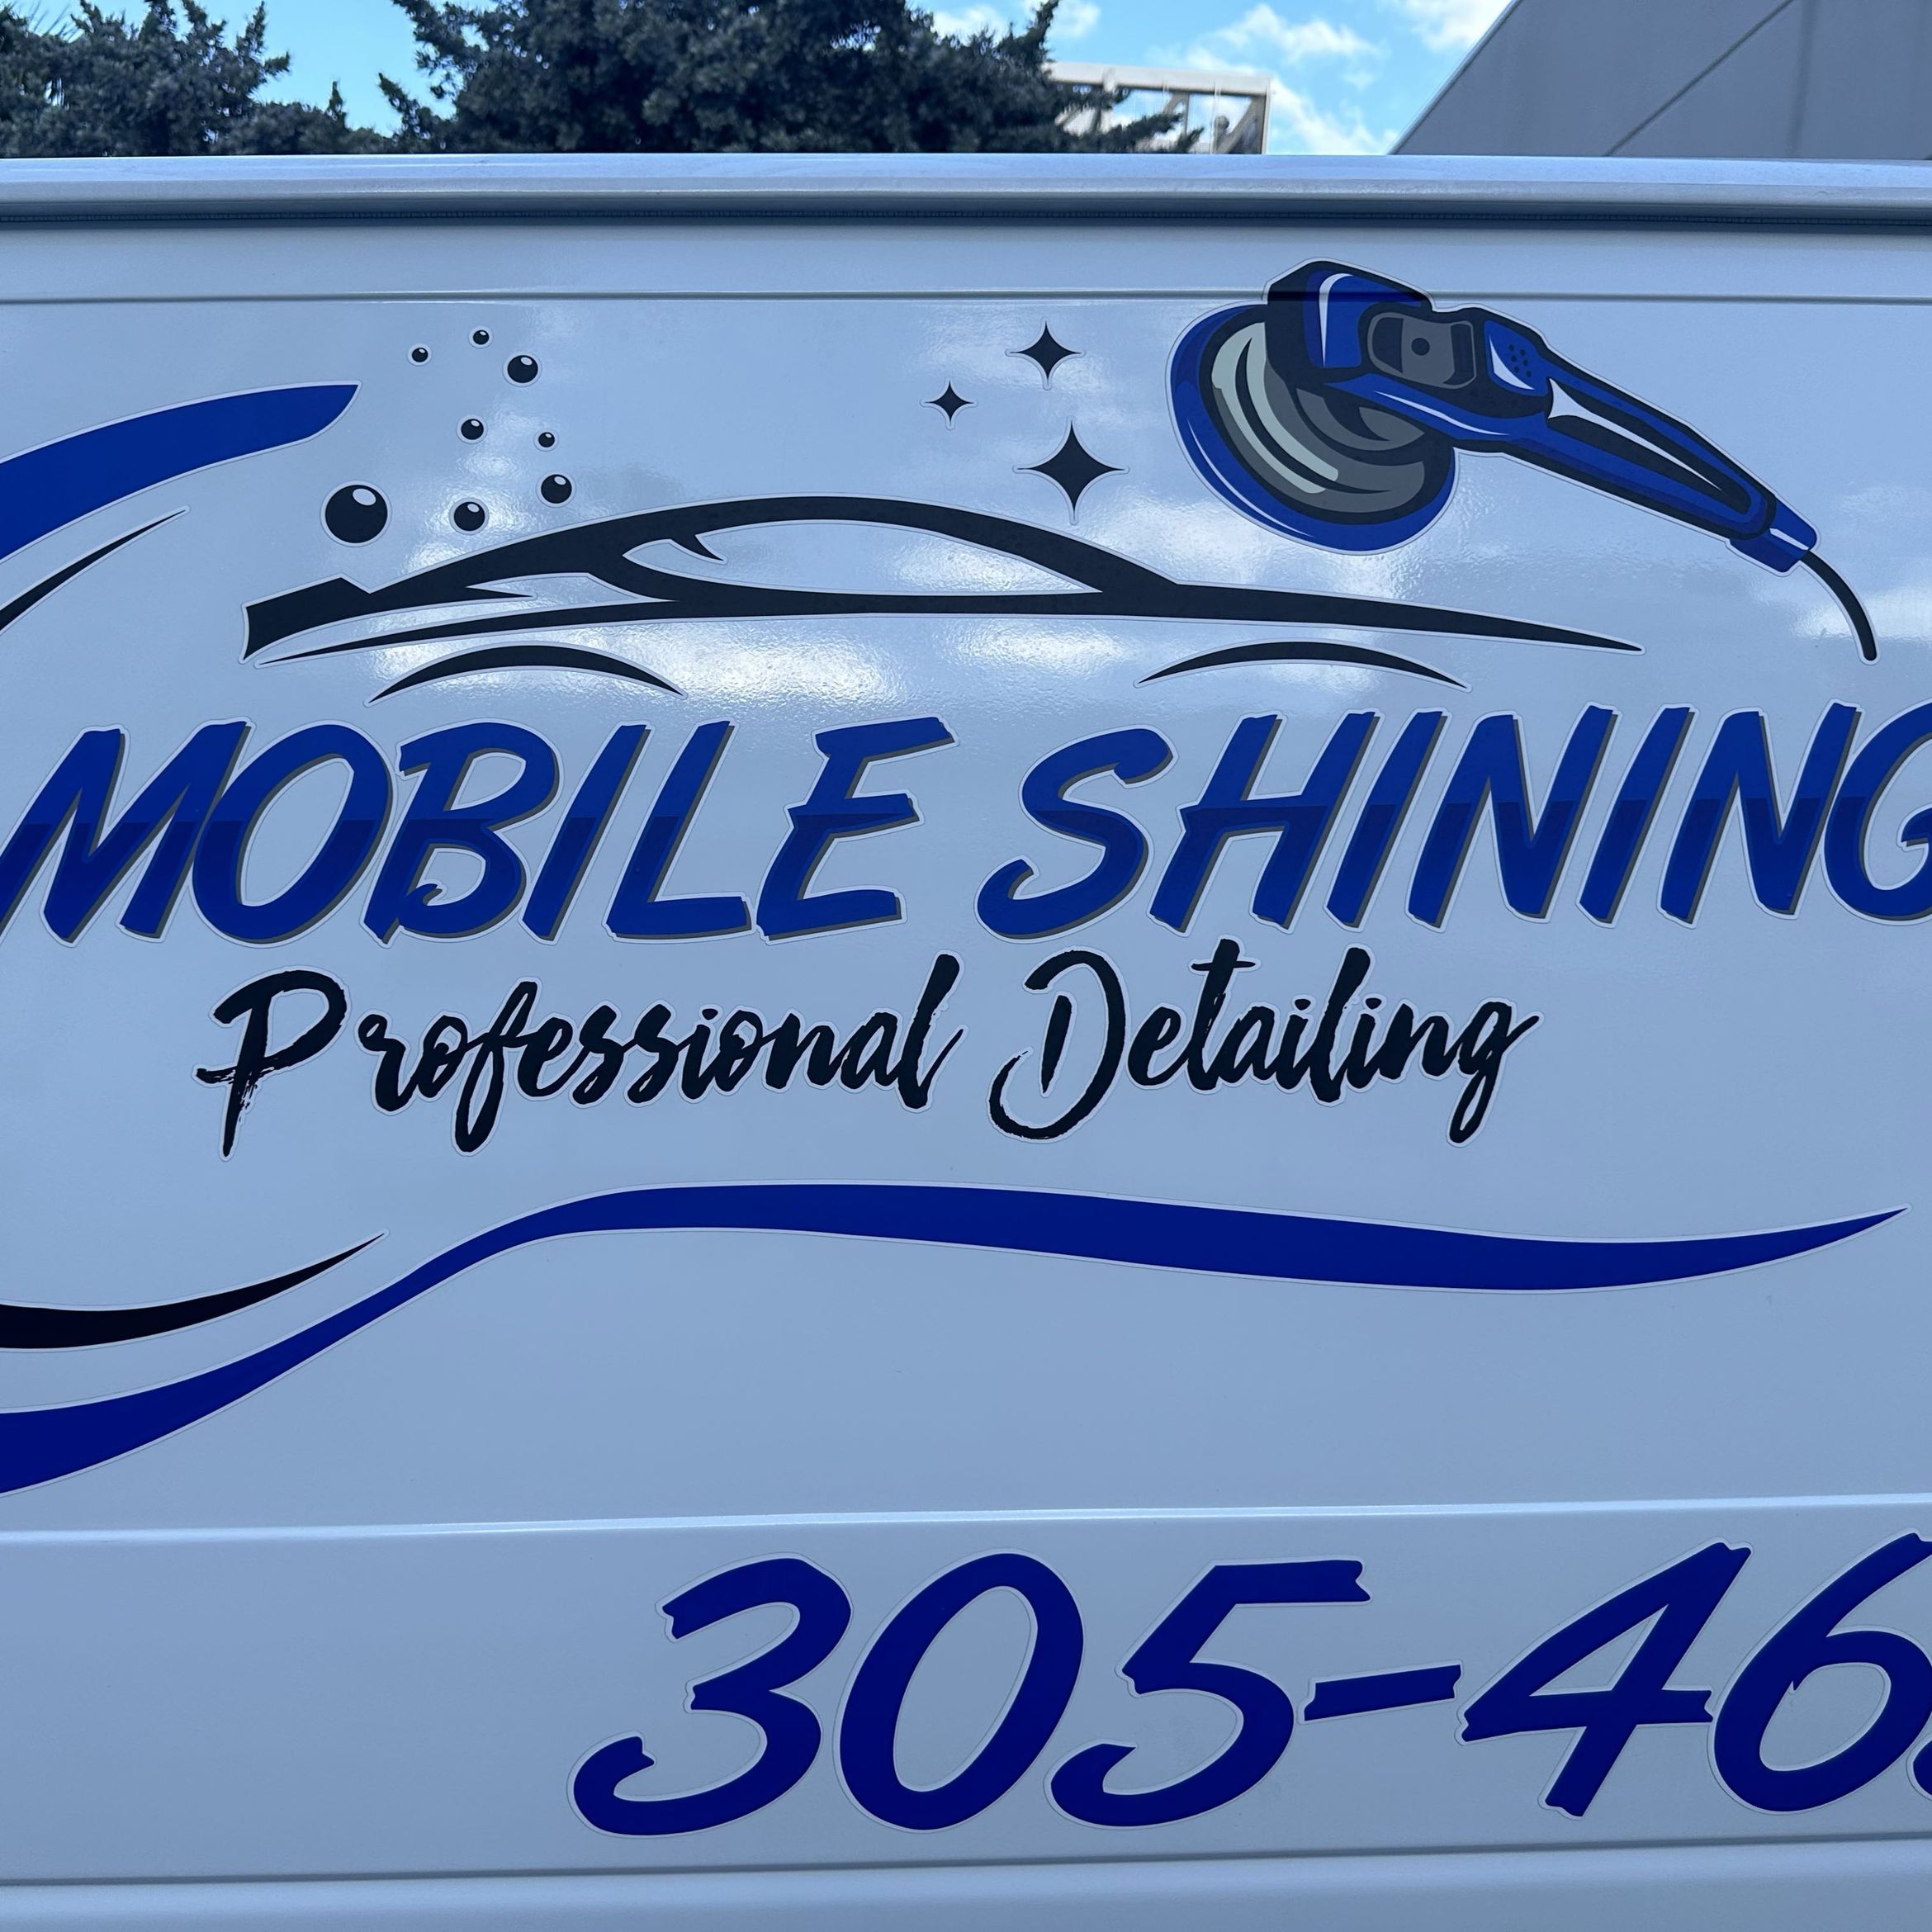 Mobile shining, 115 Clifton Rd, West Park, 33023